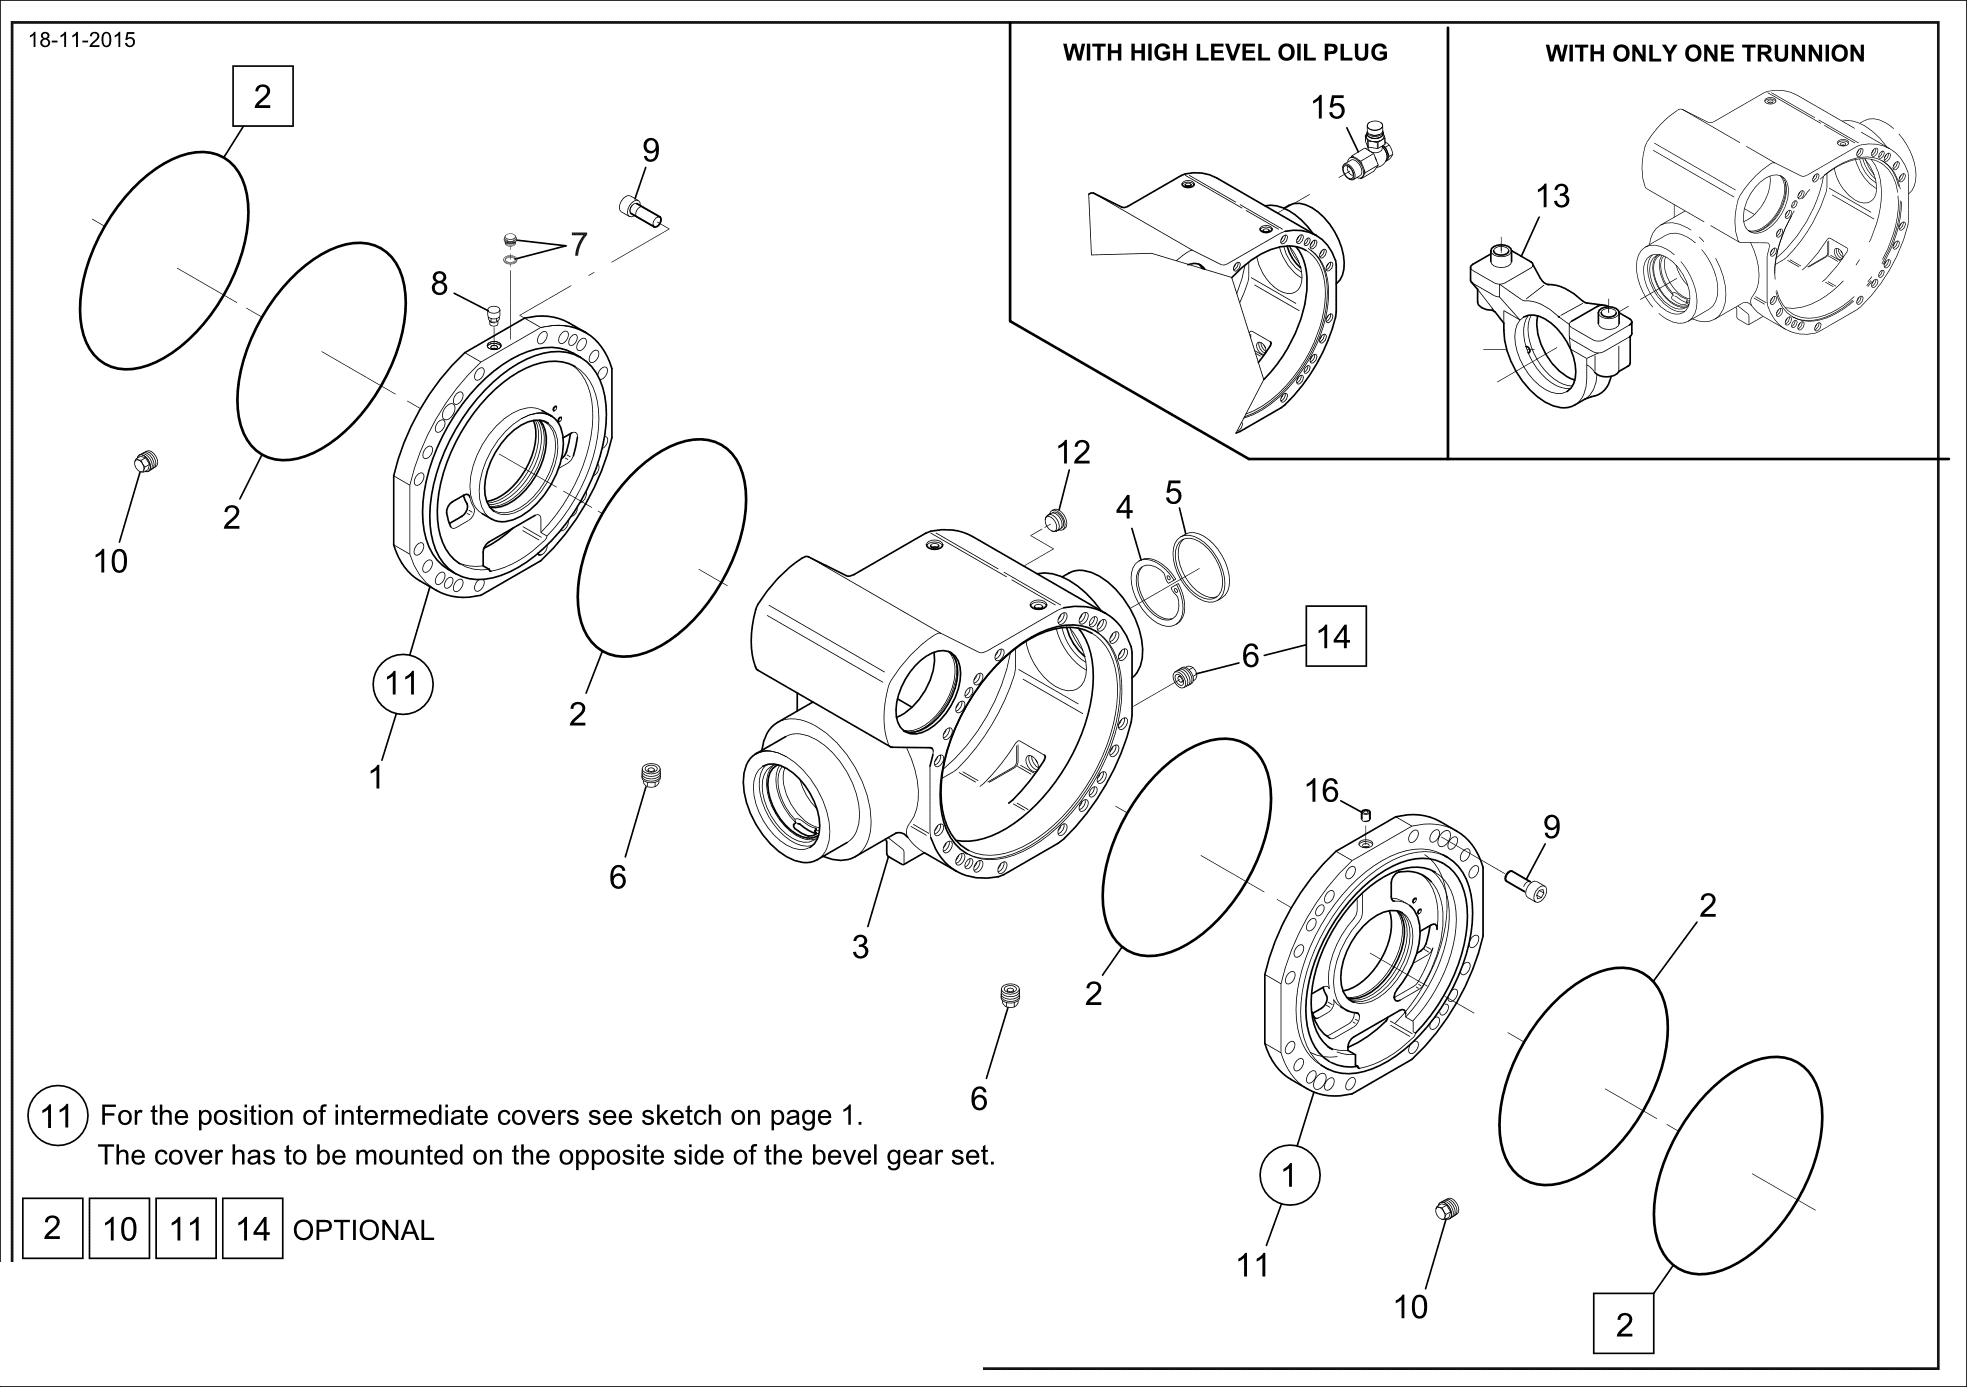 drawing for WEILER 6557 - O - RING (figure 1)